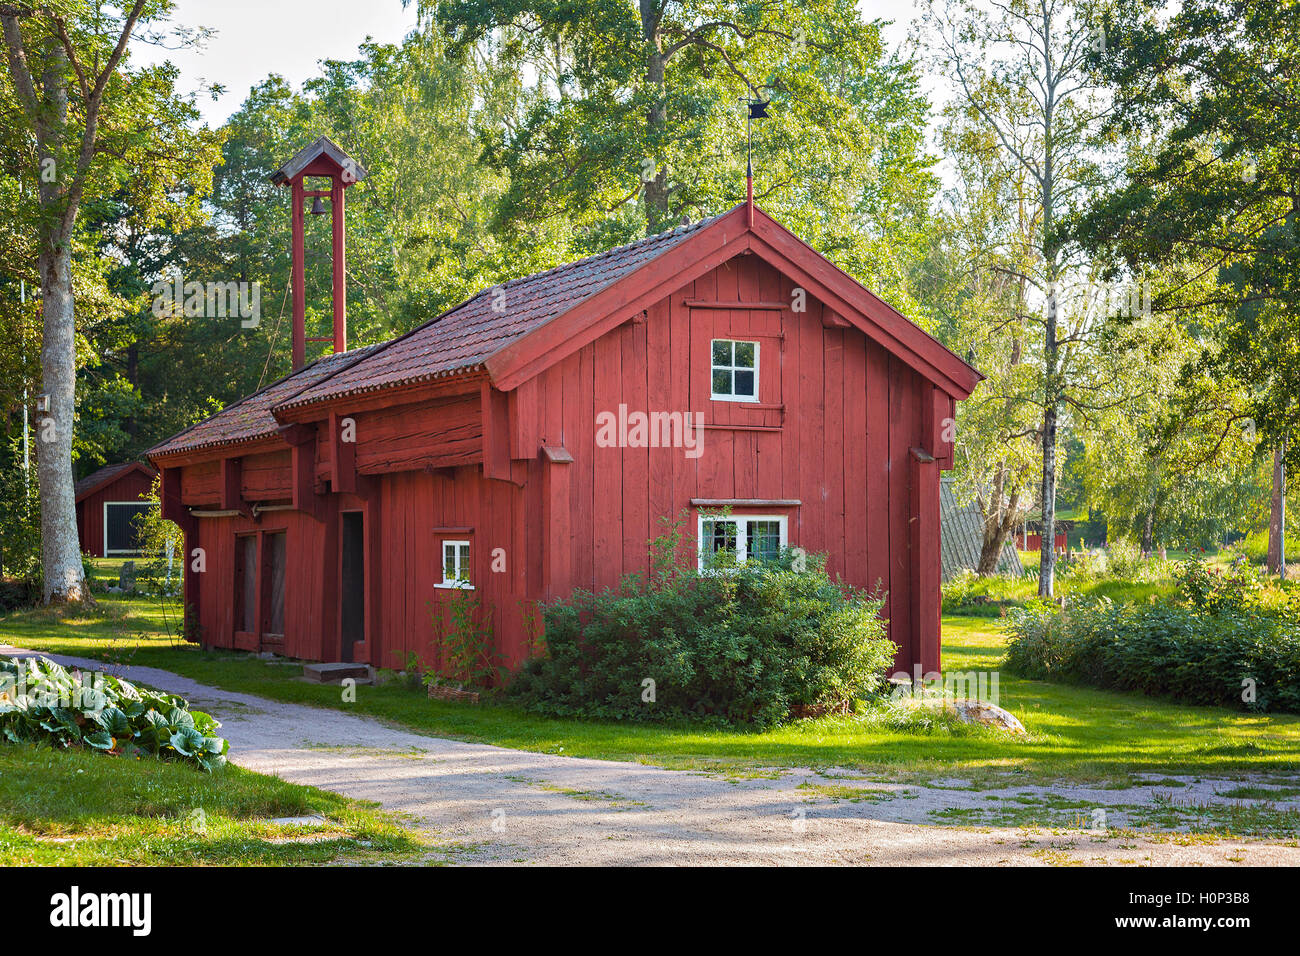 Image of traditional red farmhouse in Smaland, Sweden. Stock Photo